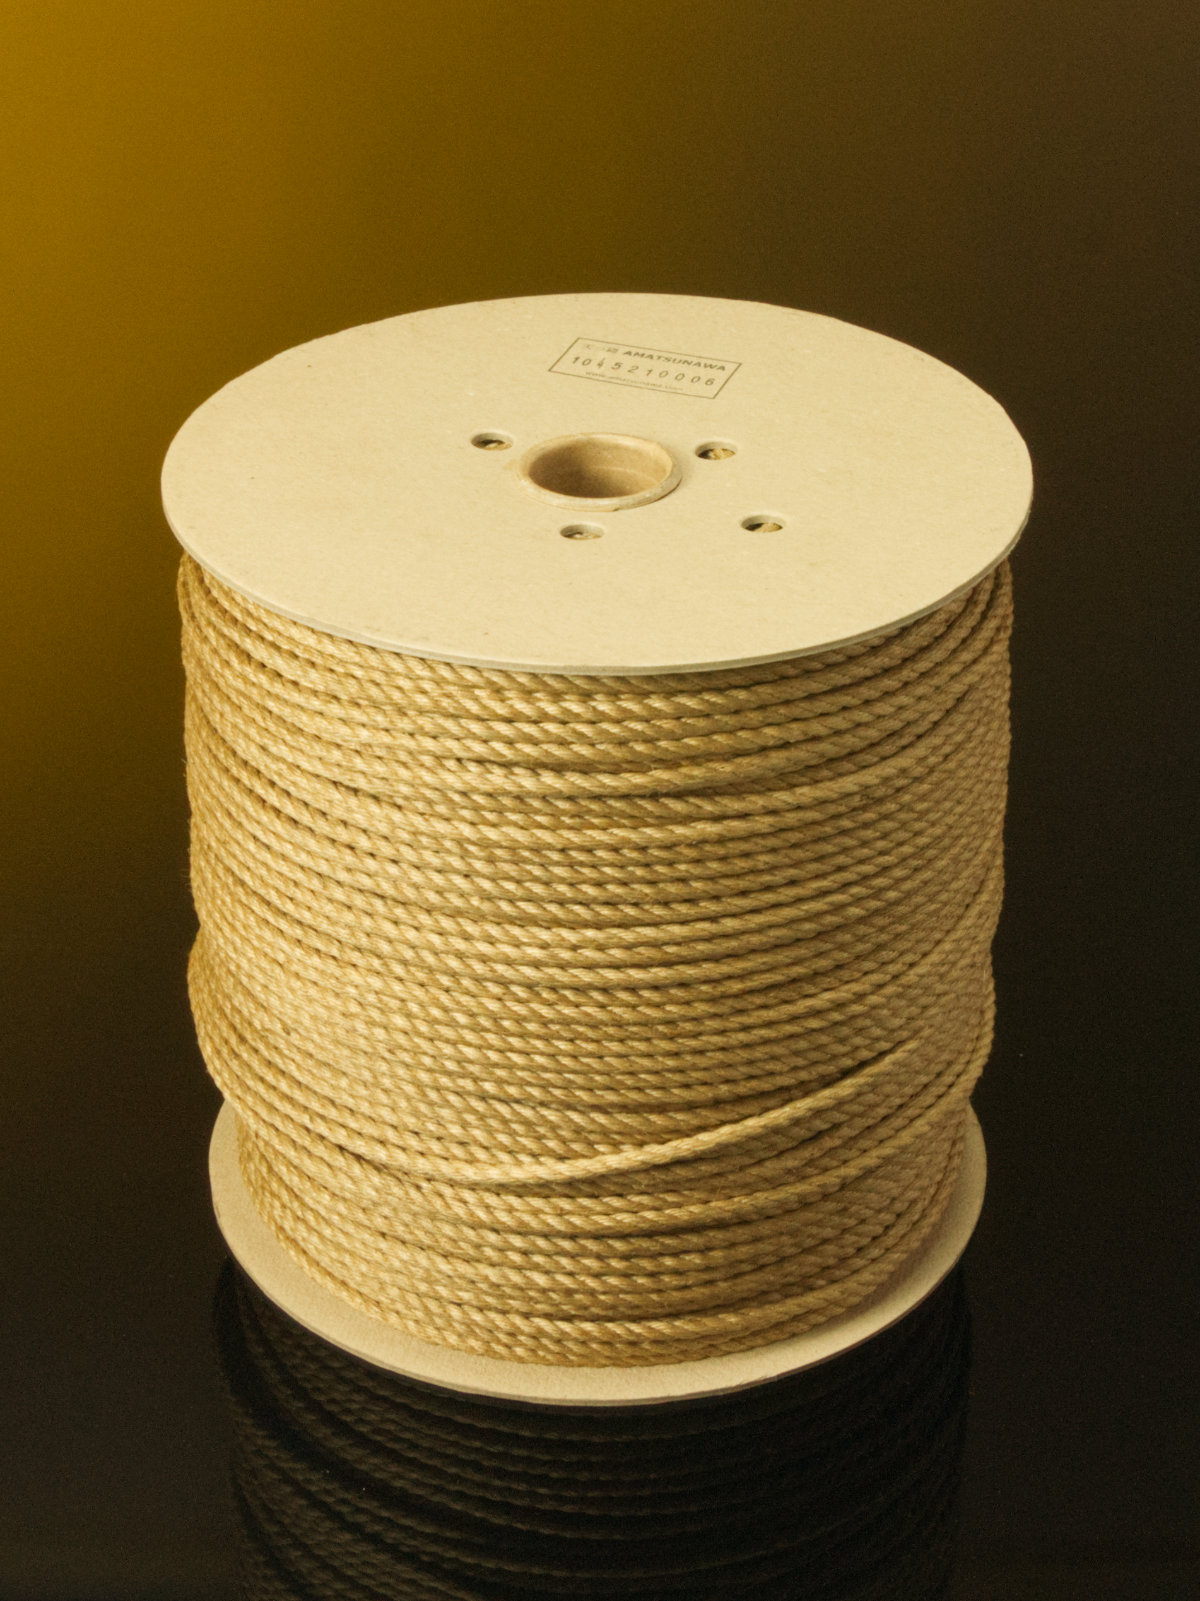 ∅ 4.5mm Jouyoku MAXI-ROLL, ~6kg, 400m guaranteed, ready-for-use Japanese-made jute rope, 5 diameters, JBO-free, NEW 2023 BATCH!